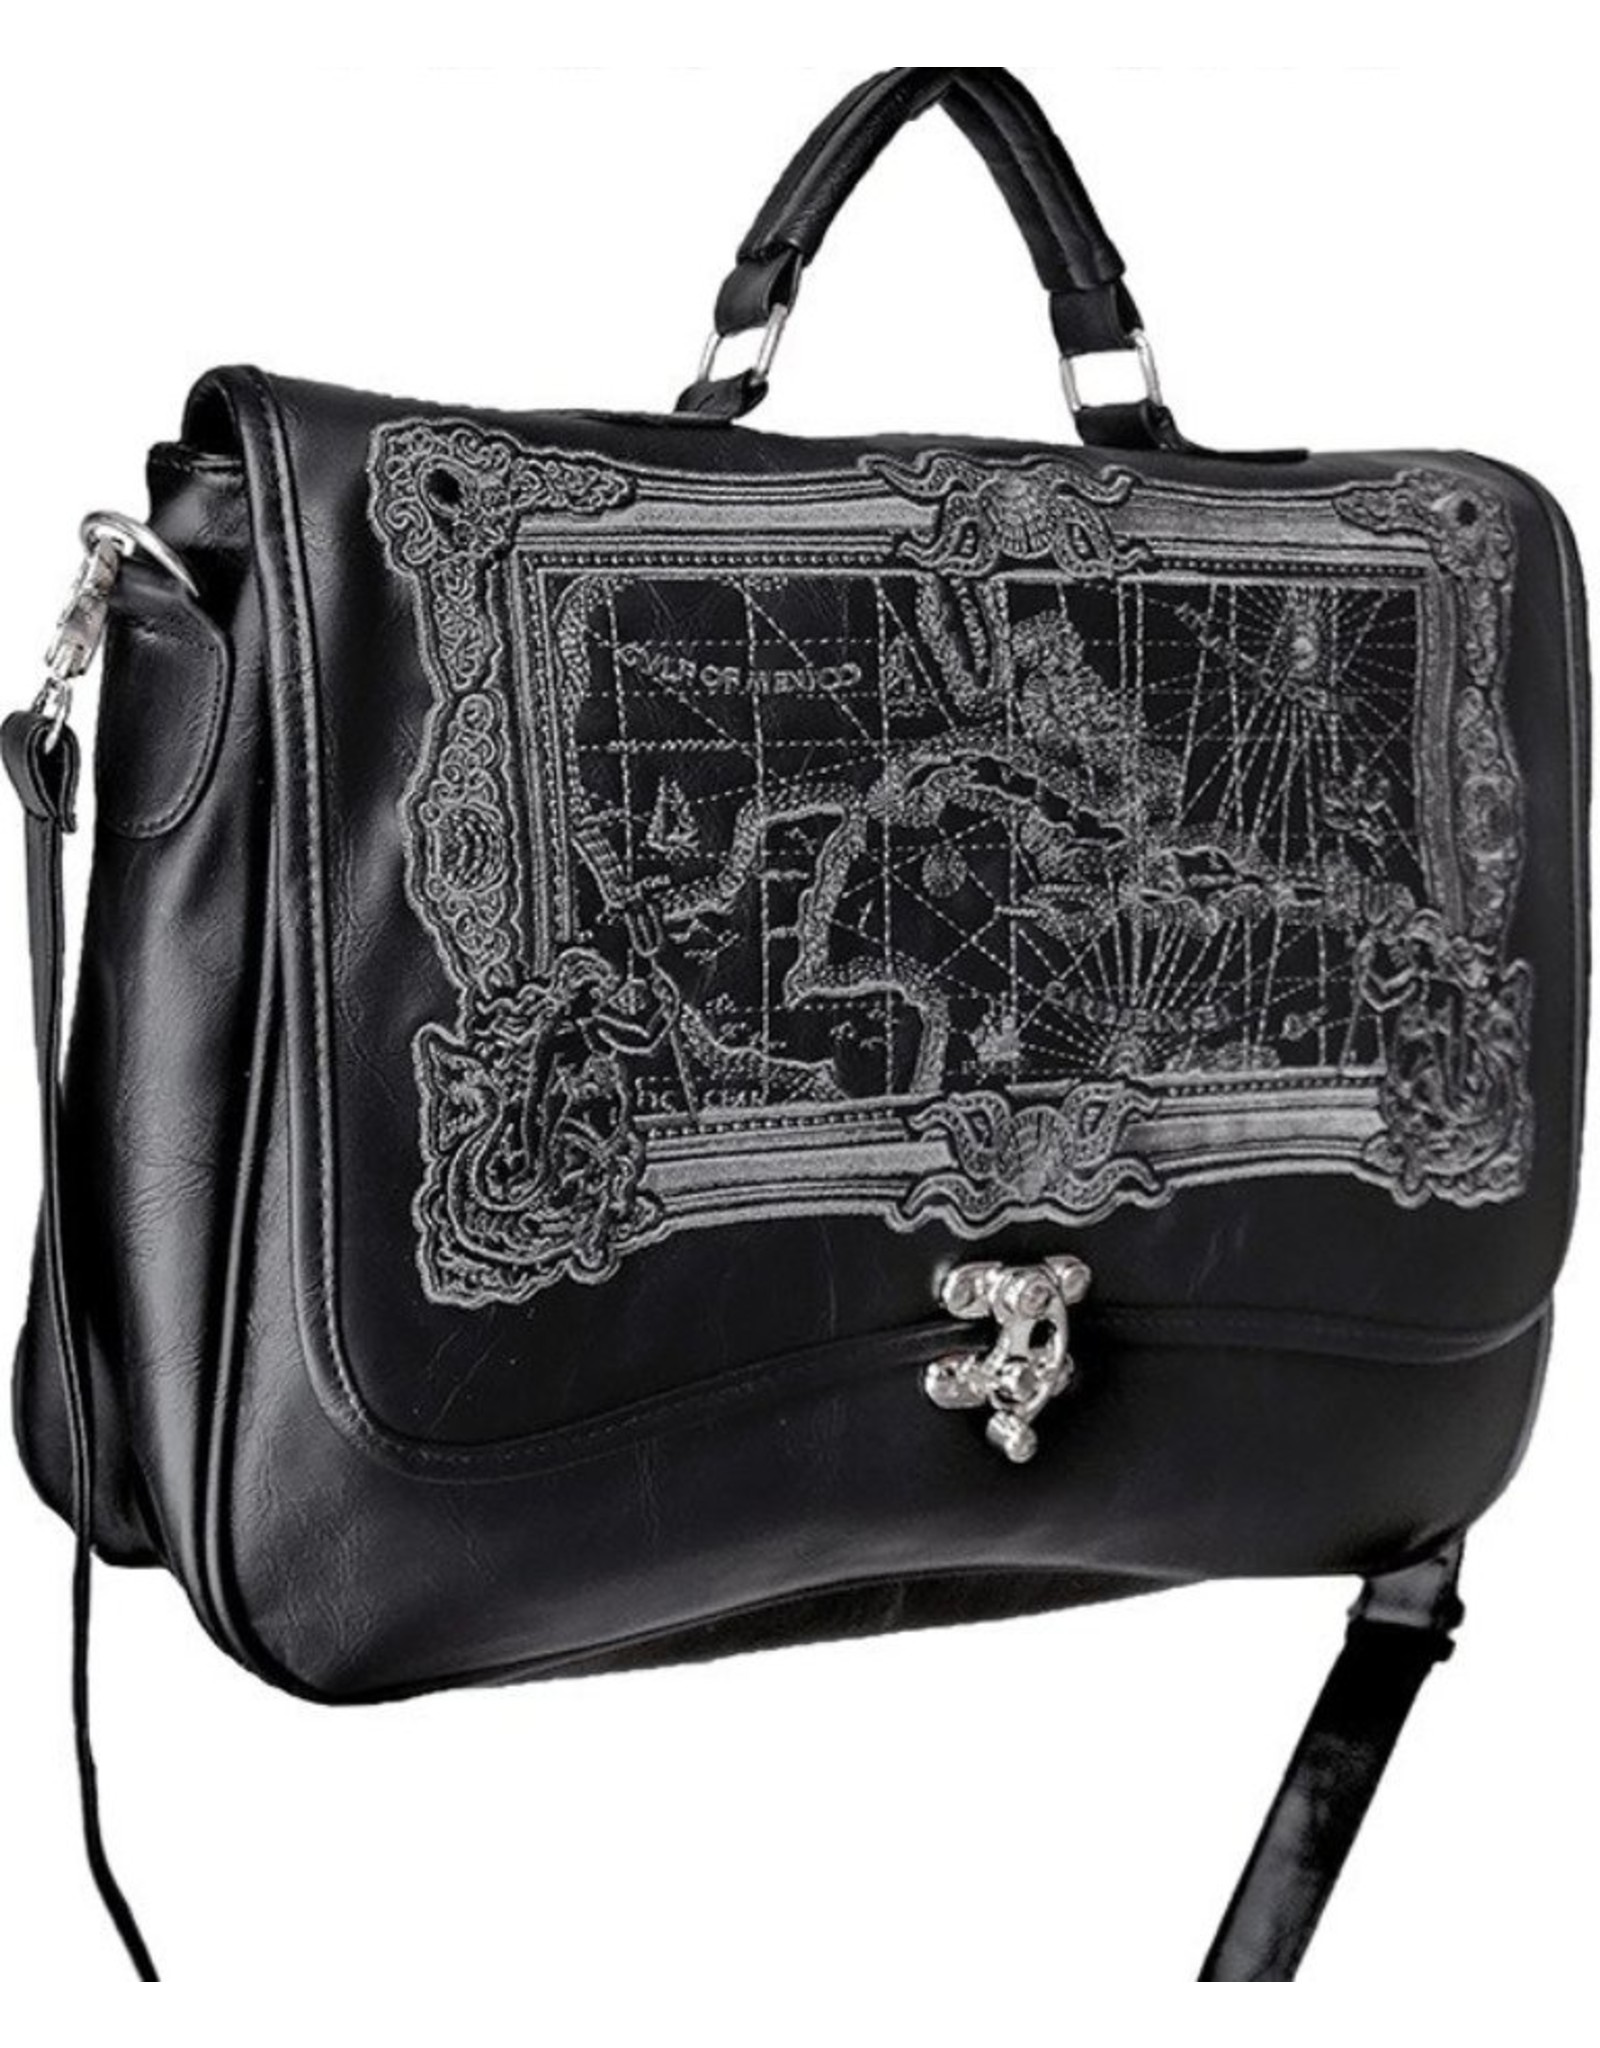 Restyle Gothic bags Steampunk bags - Restyle satchel bag Map of the Caribbean Sea (black)